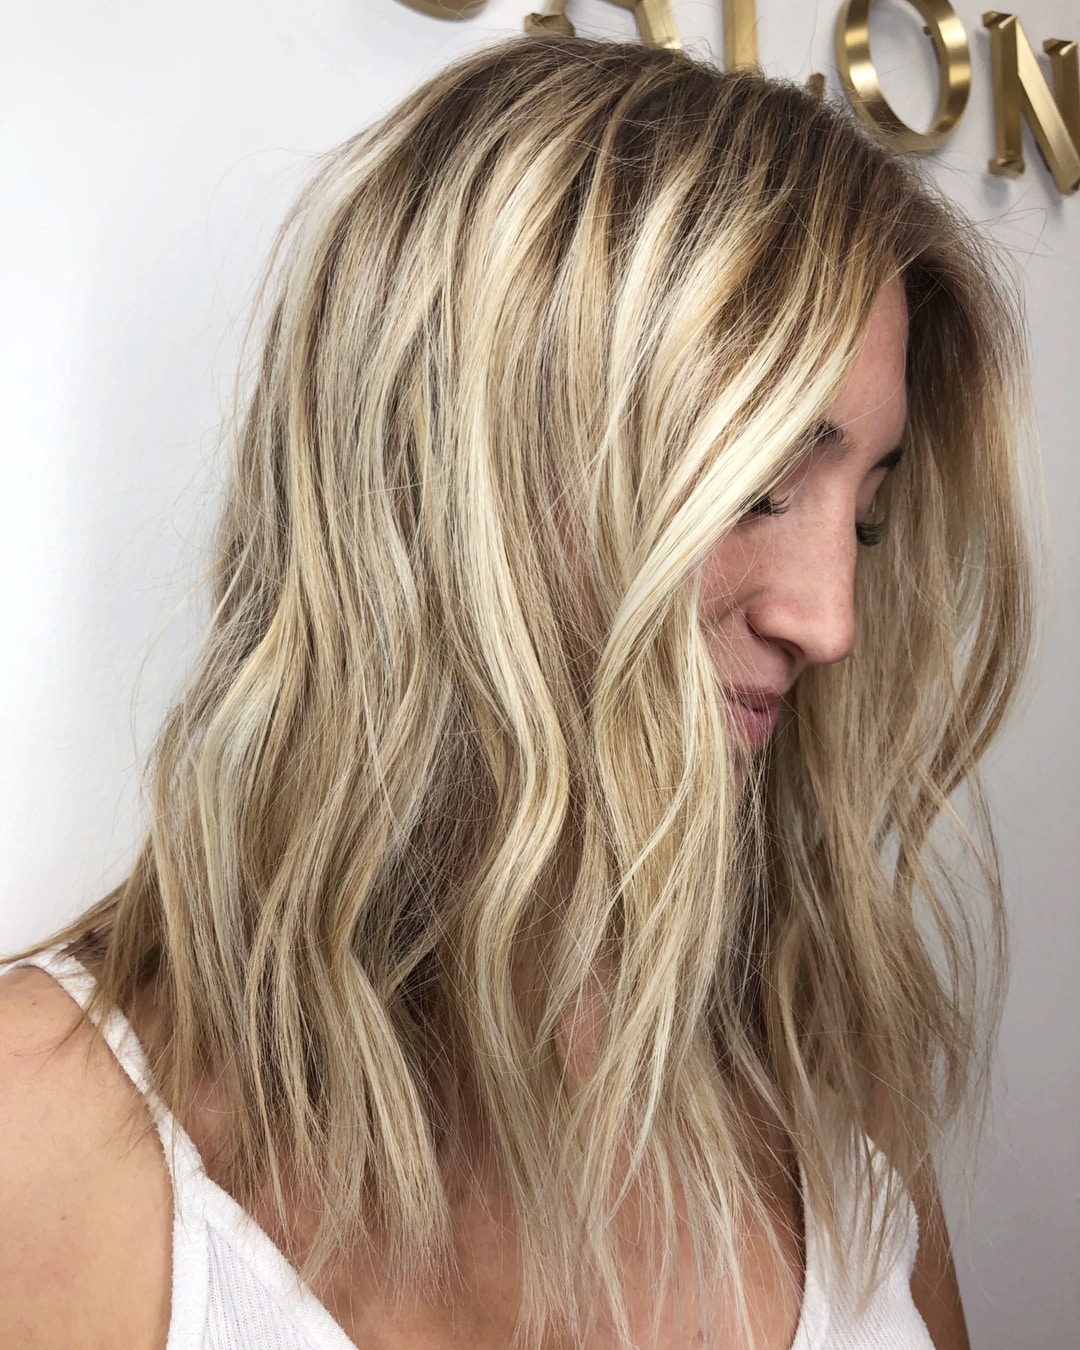 Blonde Medium Hairstyle for Wavy Thick Hair